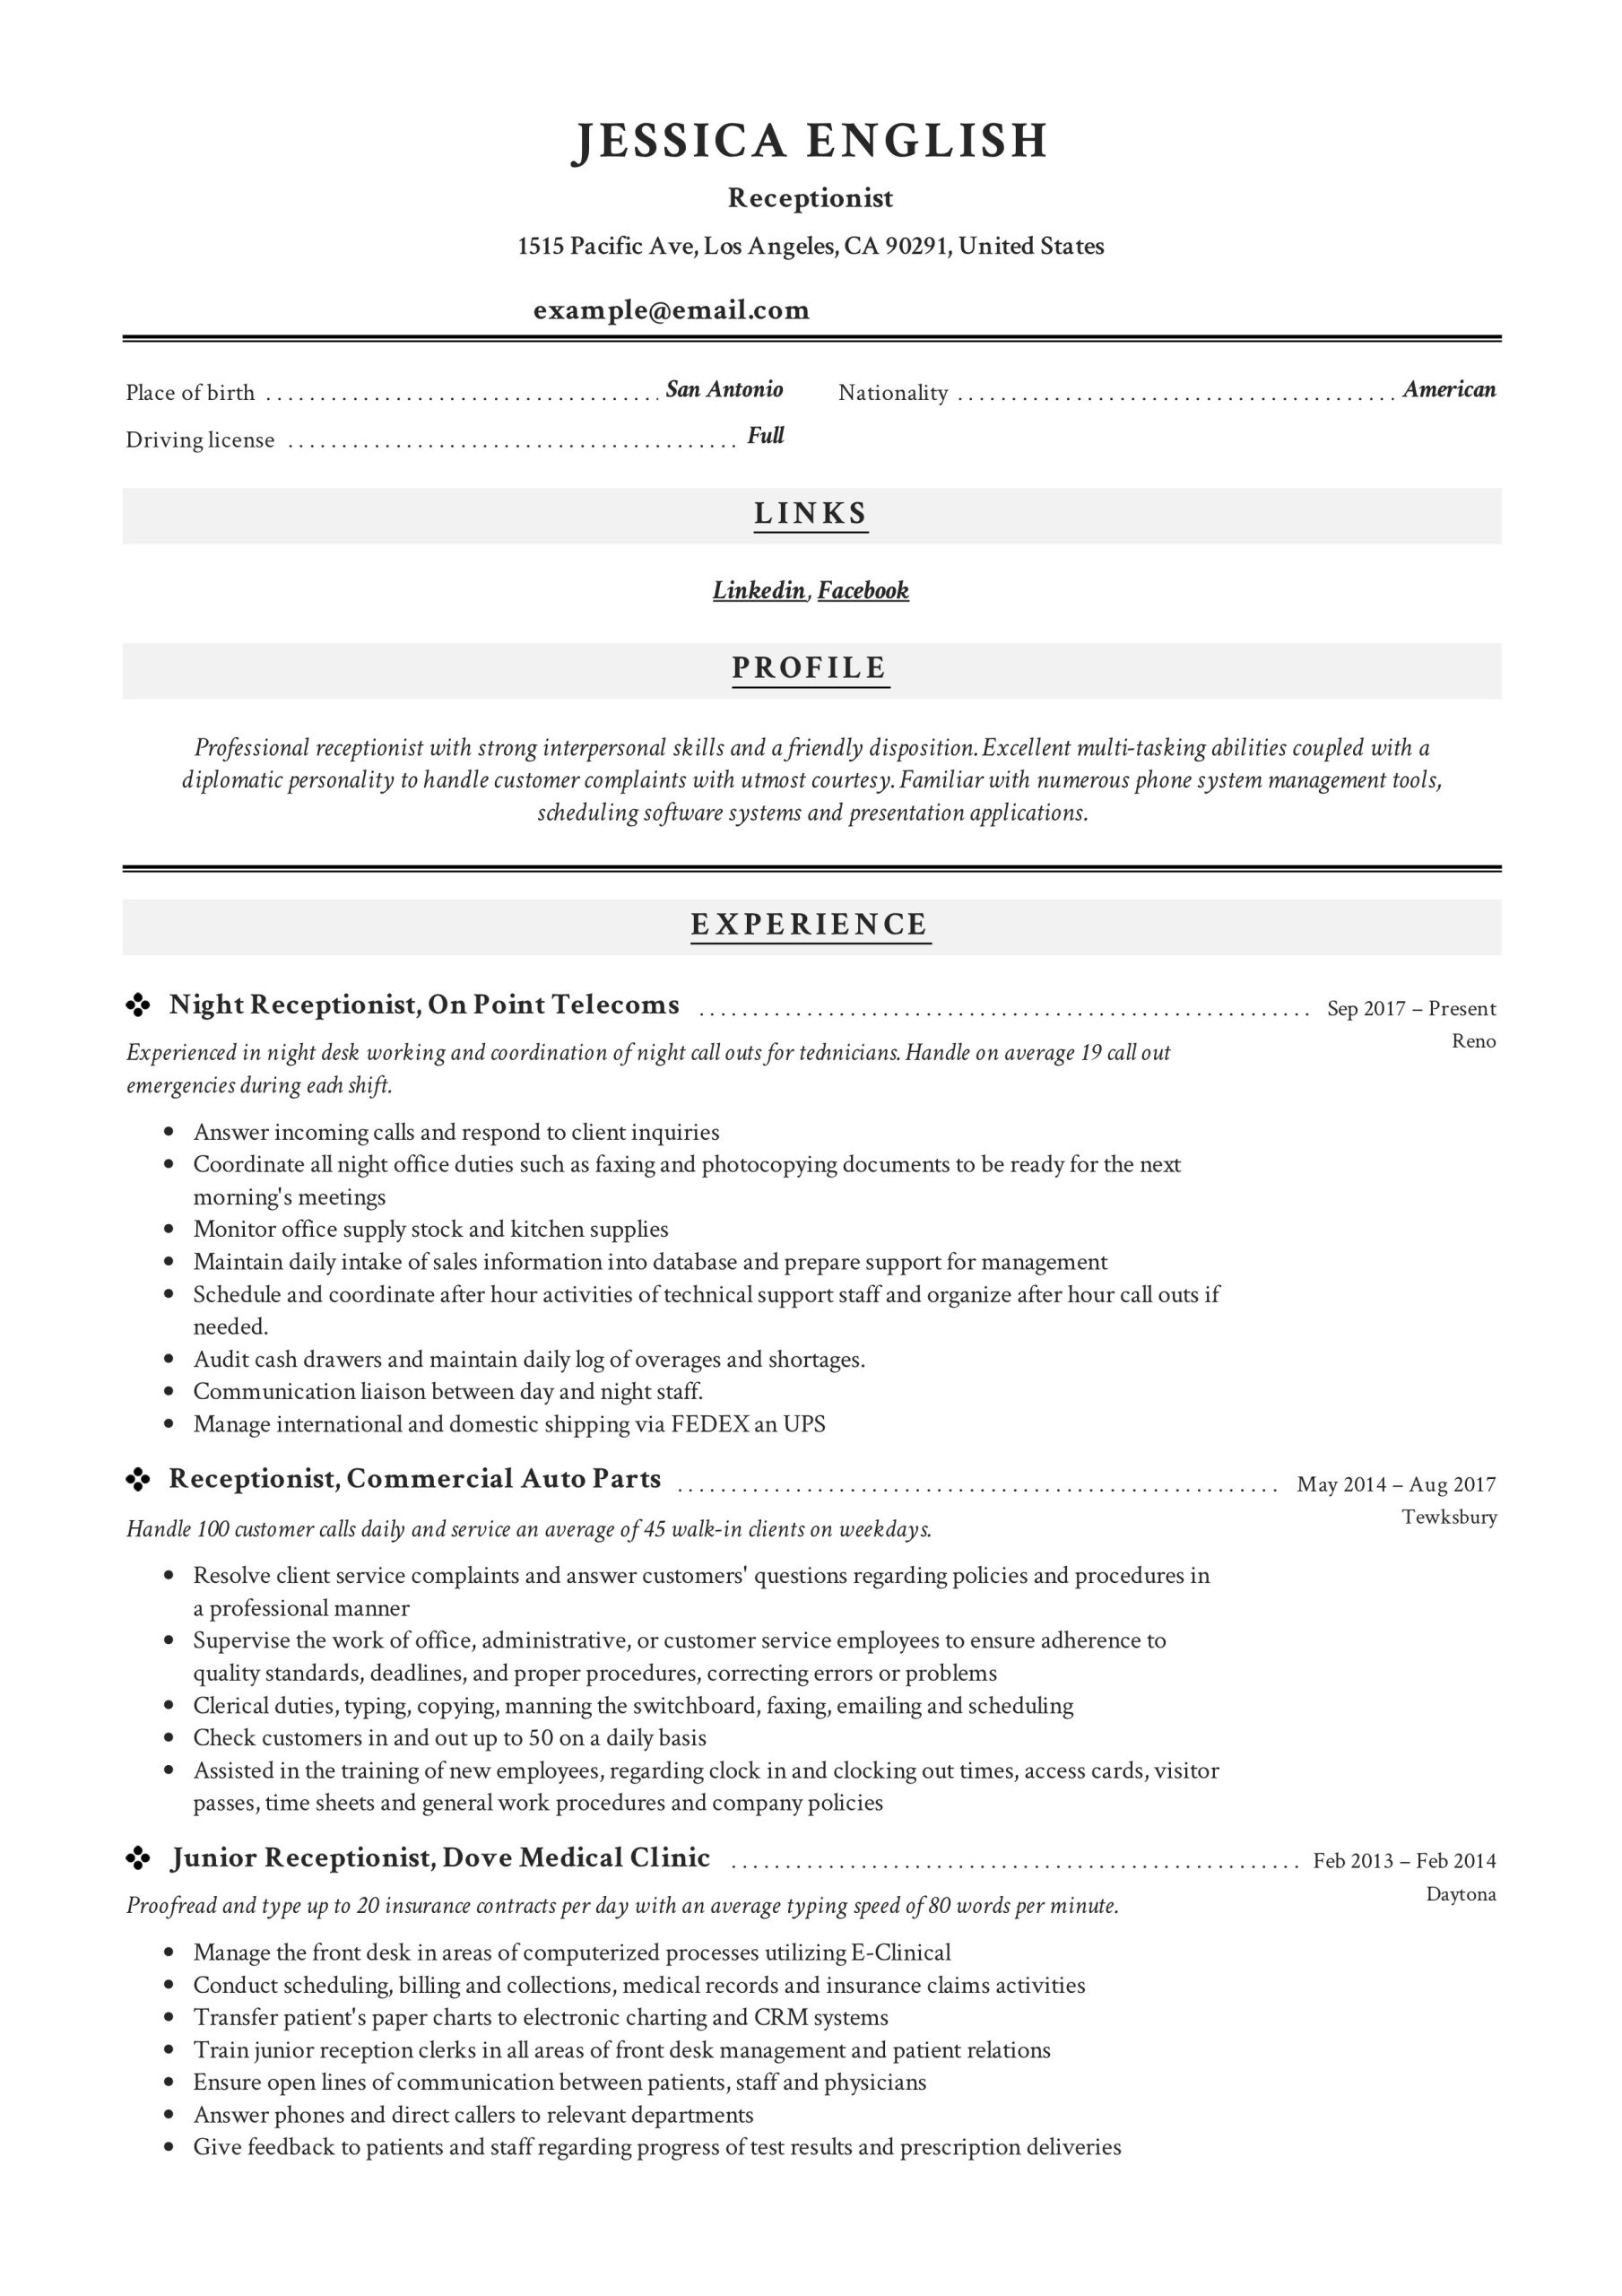 Sample Resume for Front Office Receptionist In India Receptionist Resume Example & Writing Guide 12 Samples Pdf 2020